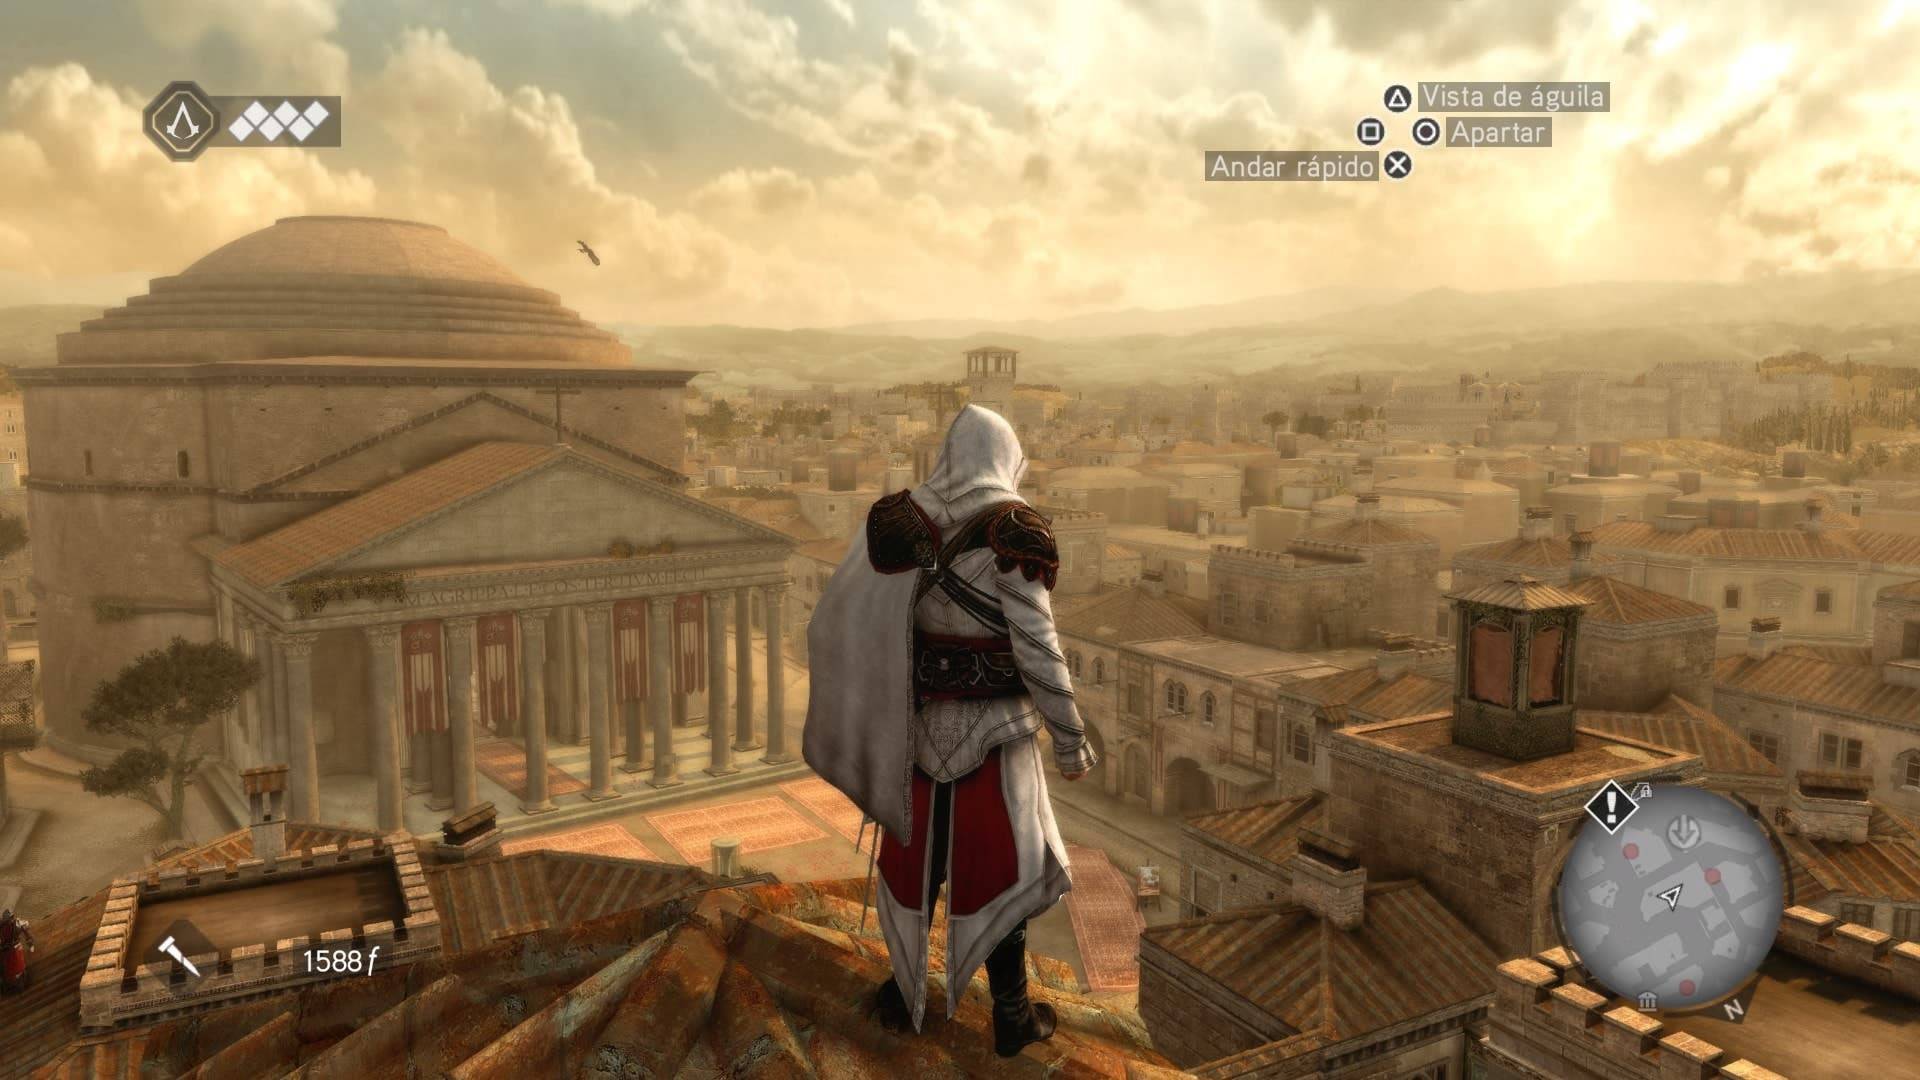 Assassin's Creed: The Ezio Collection + Assassin's Creed III